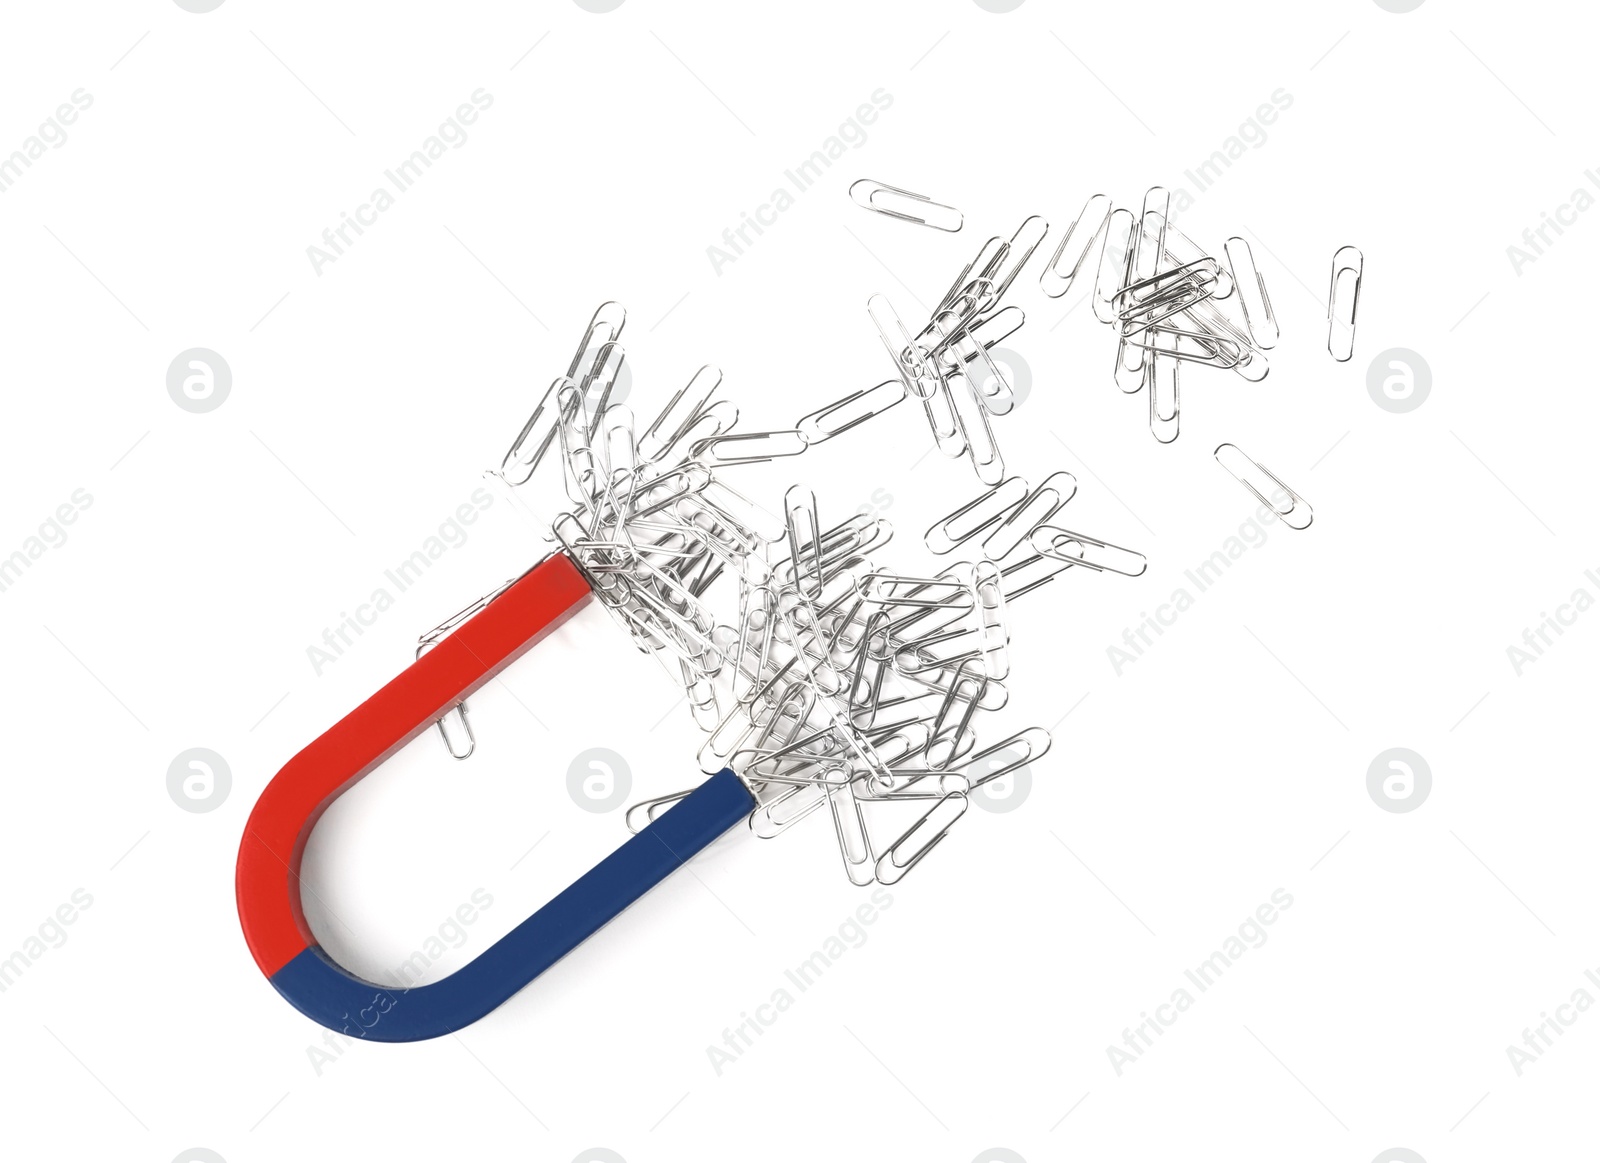 Photo of Magnet attracting paper clips on white background, top view